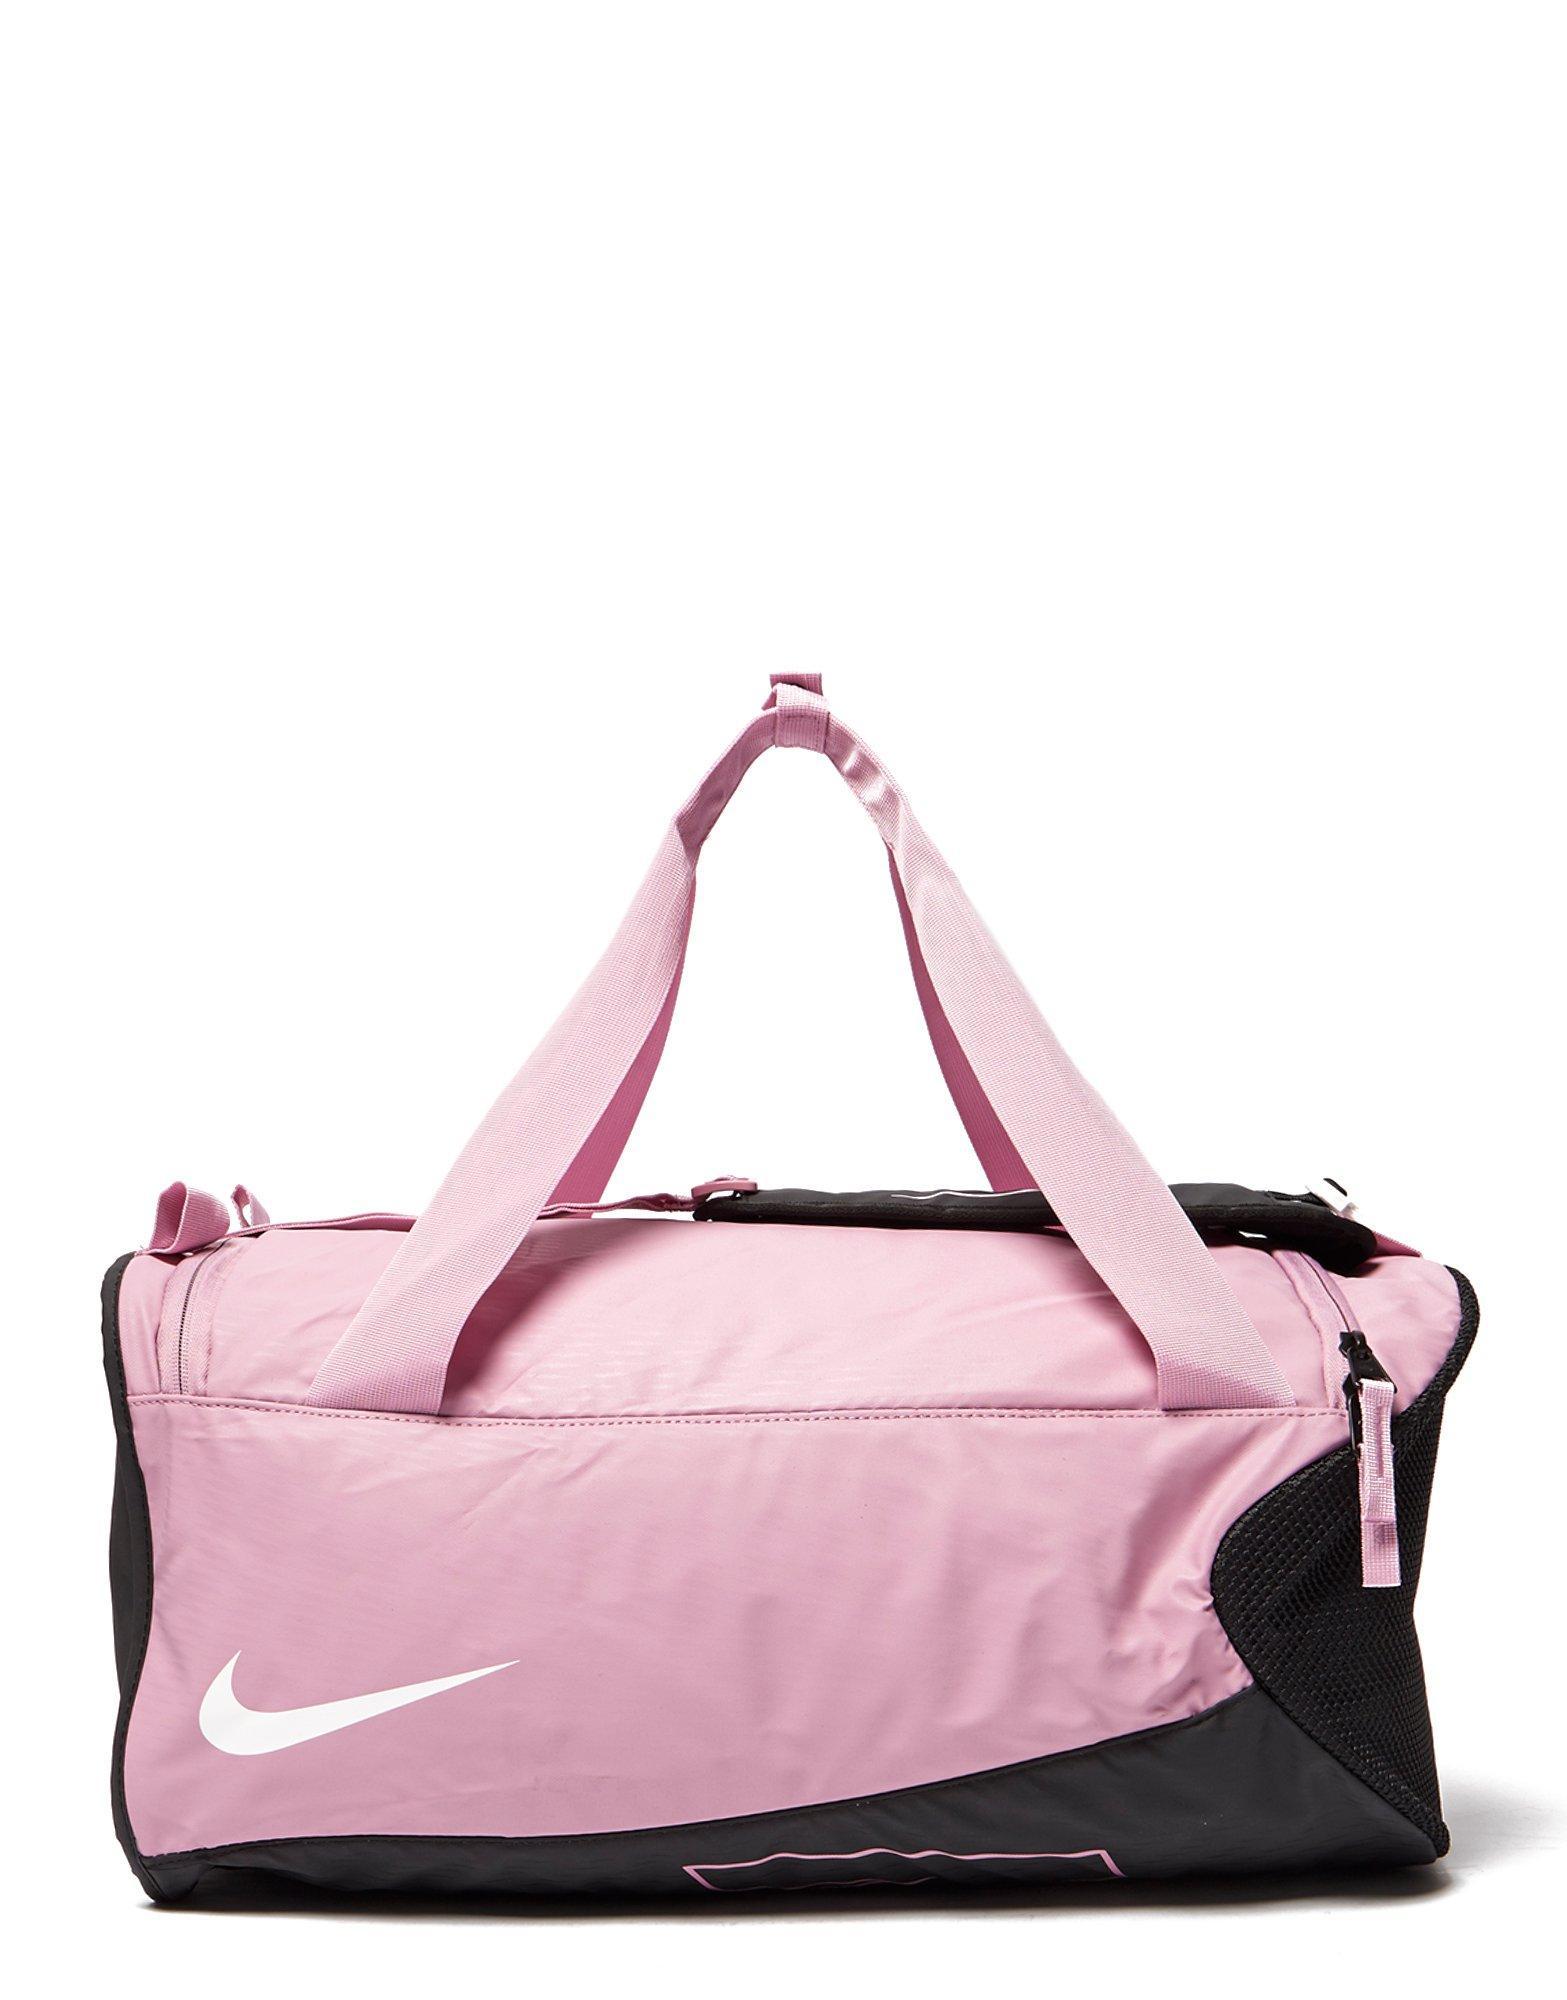 Nike Synthetic Alpha Duffle Bag in Pink - Lyst